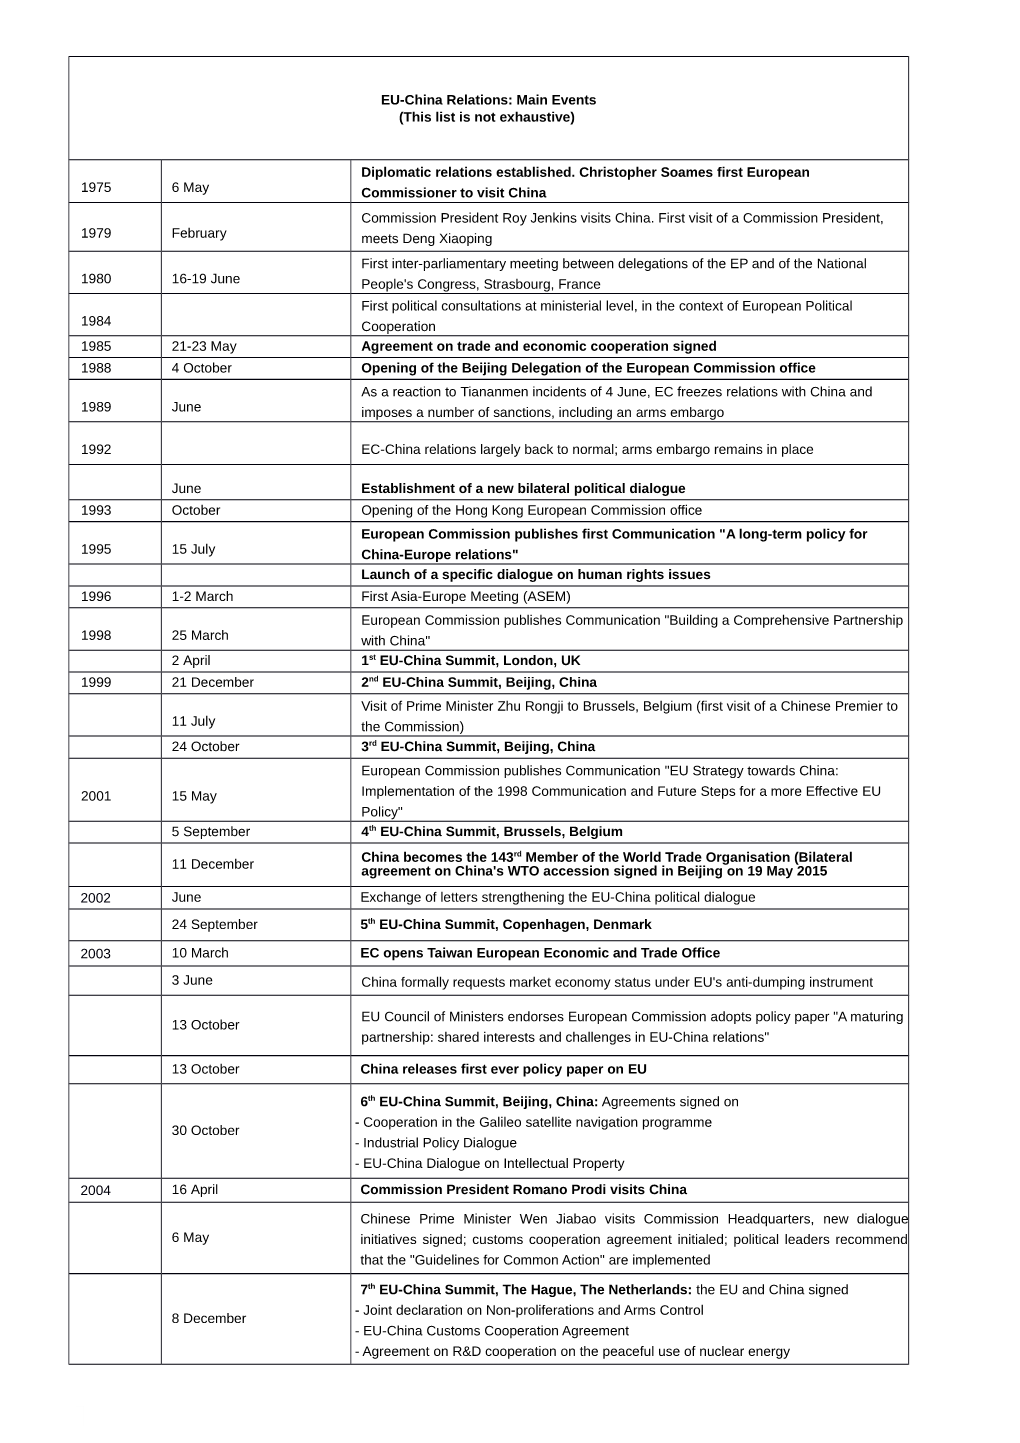 EU-China Relations: Main Events (This List Is Not Exhaustive)